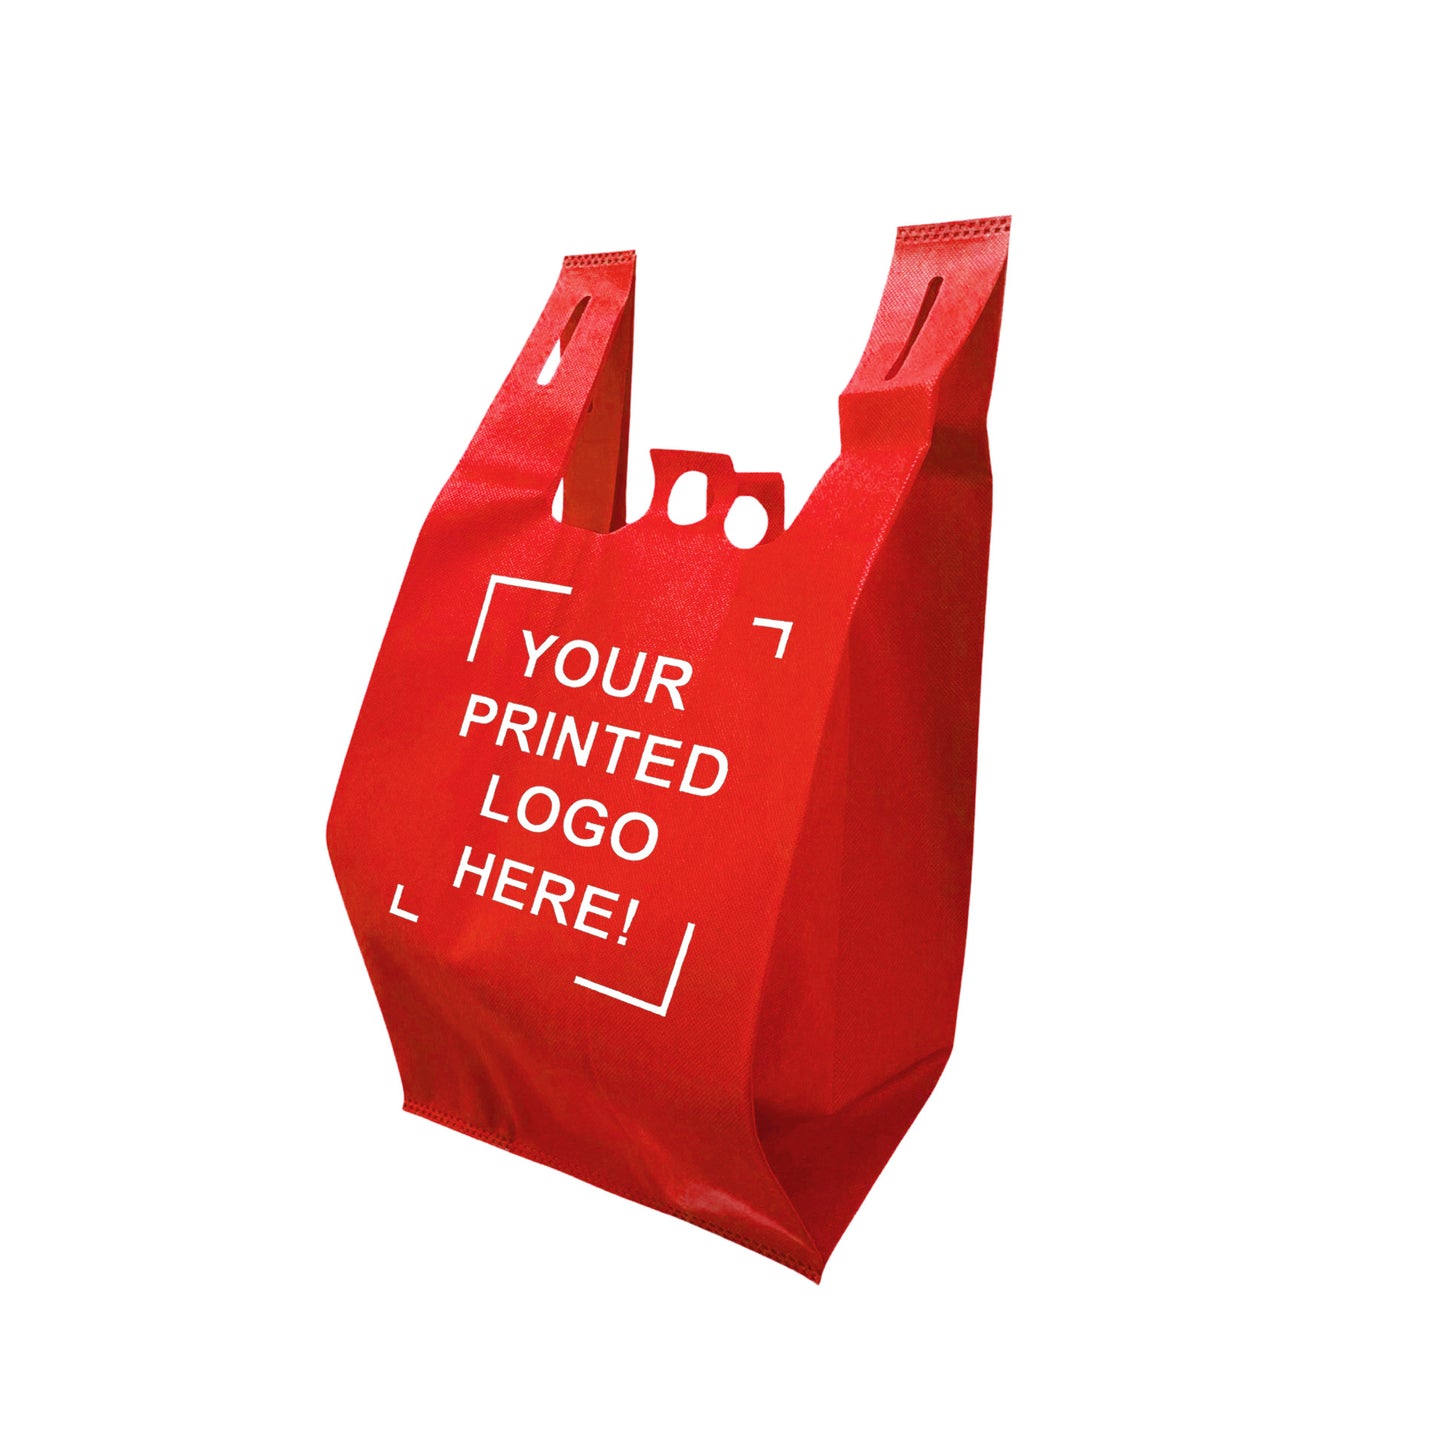 200pcs, Non-Woven Reusable T-Shirt Bag 11x7x20 inches Red Shopping Bags Pinch Bottom, One Color Custom Print, Printed in Canada